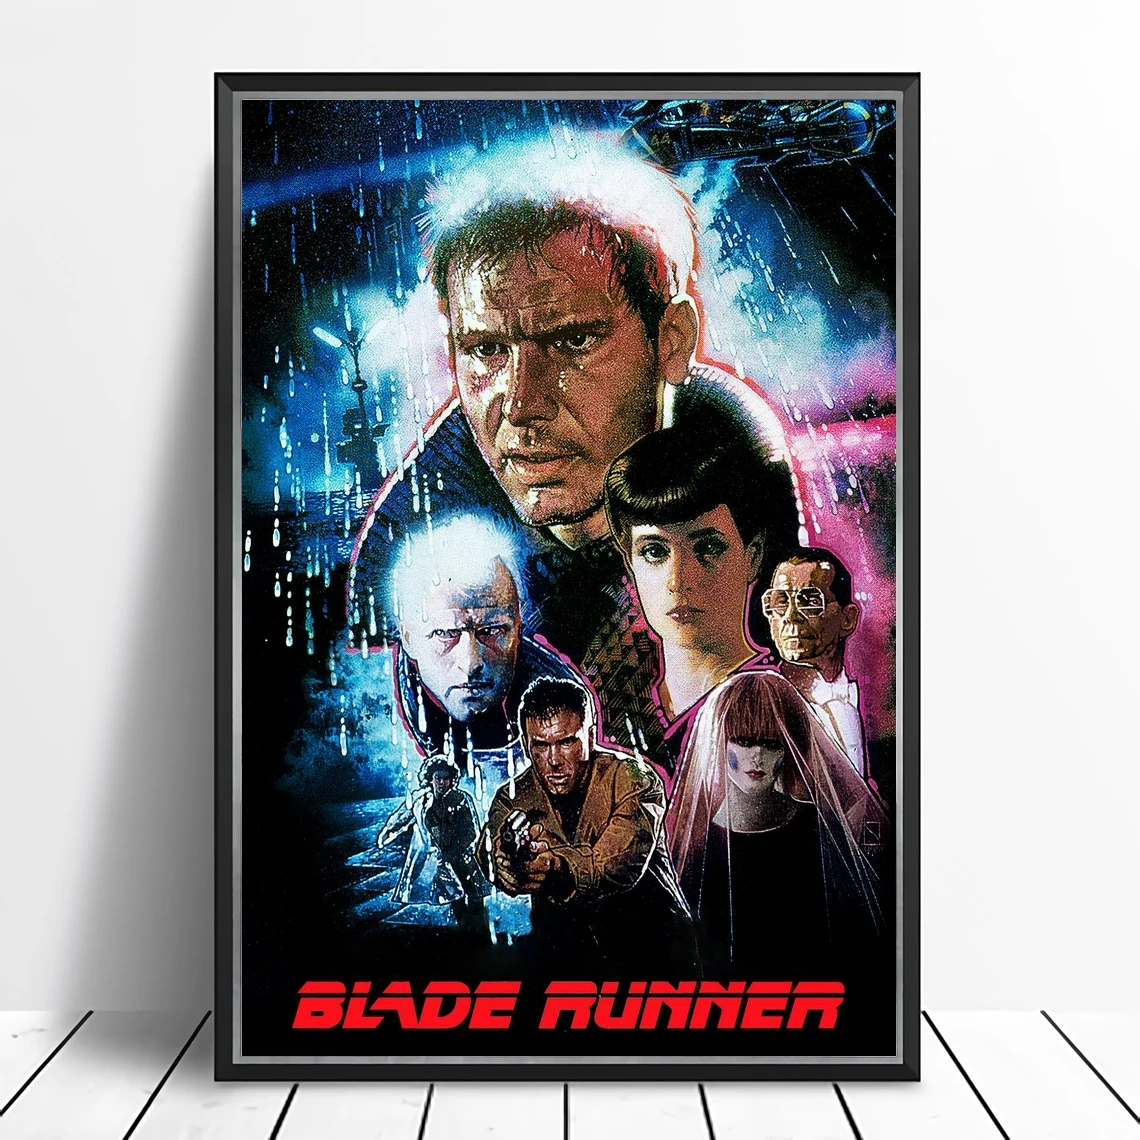 Pasture festspil Busk Blade Runner (1982) Poster Ridley Scott Movie Harrison Ford Rutger Hauer  Sean Young Edward James Olmos Print Art Gift - Painting & Calligraphy -  AliExpress